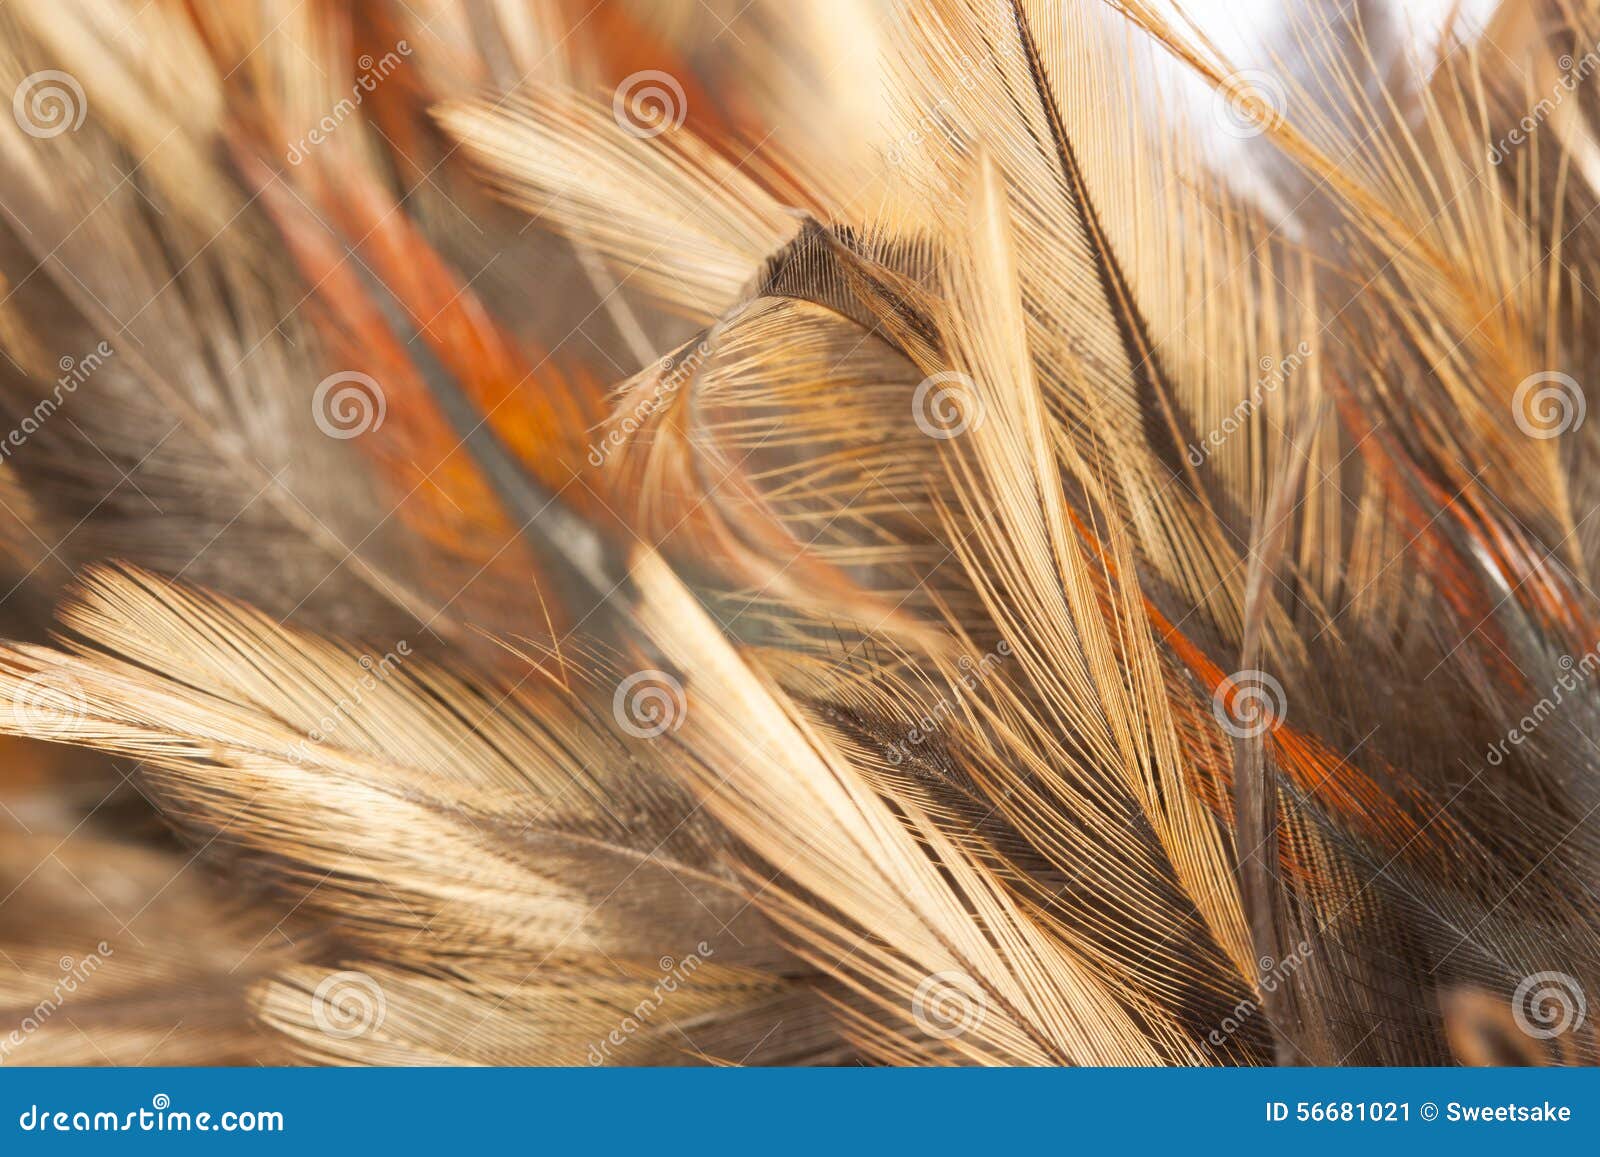 Close-Up Shot of Brown Feathers · Free Stock Photo